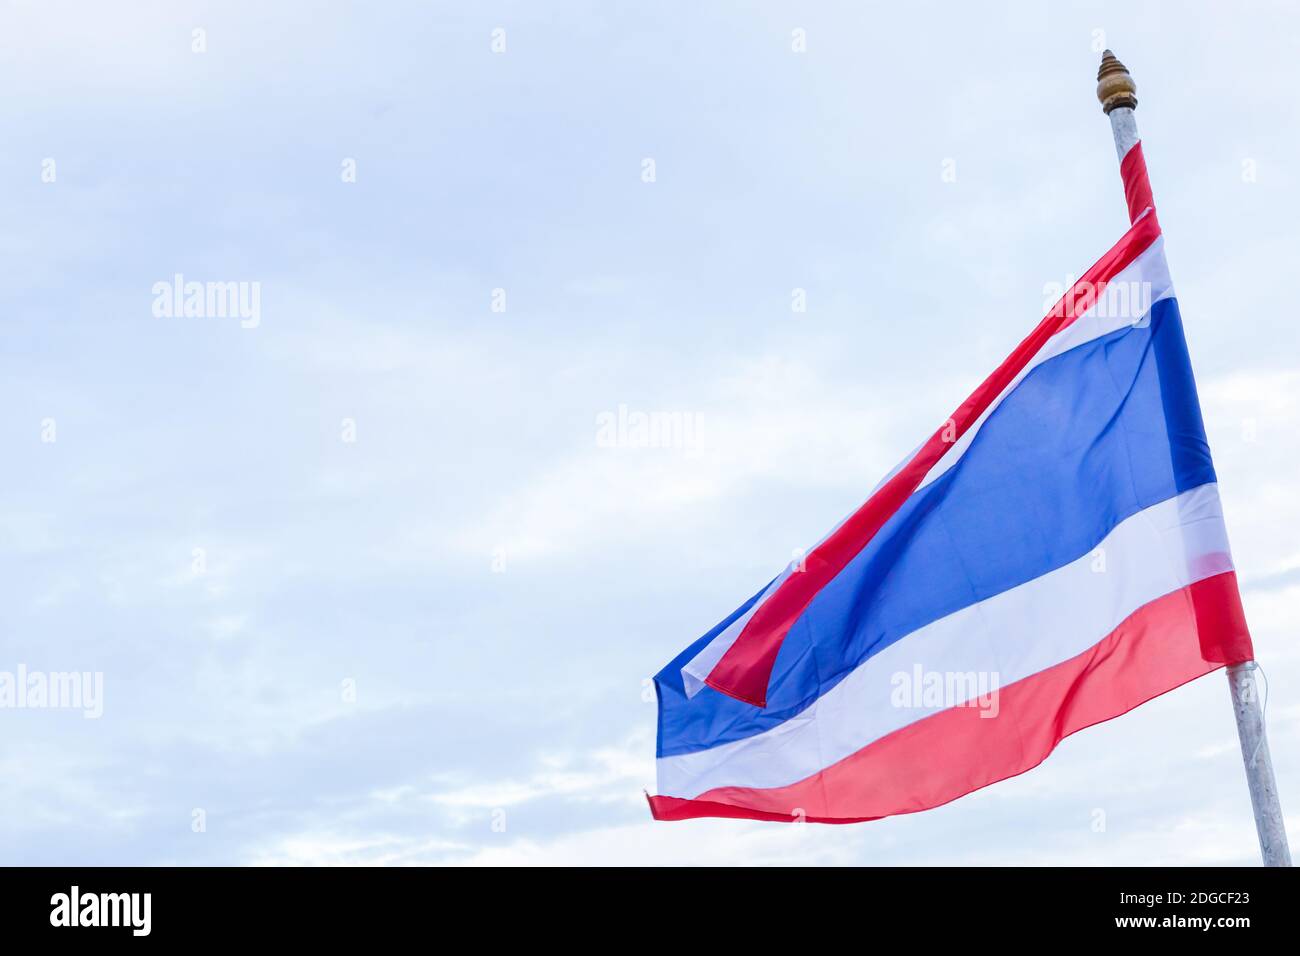 Thailand flag red, white and blue stripes against a bright sky Stock Photo